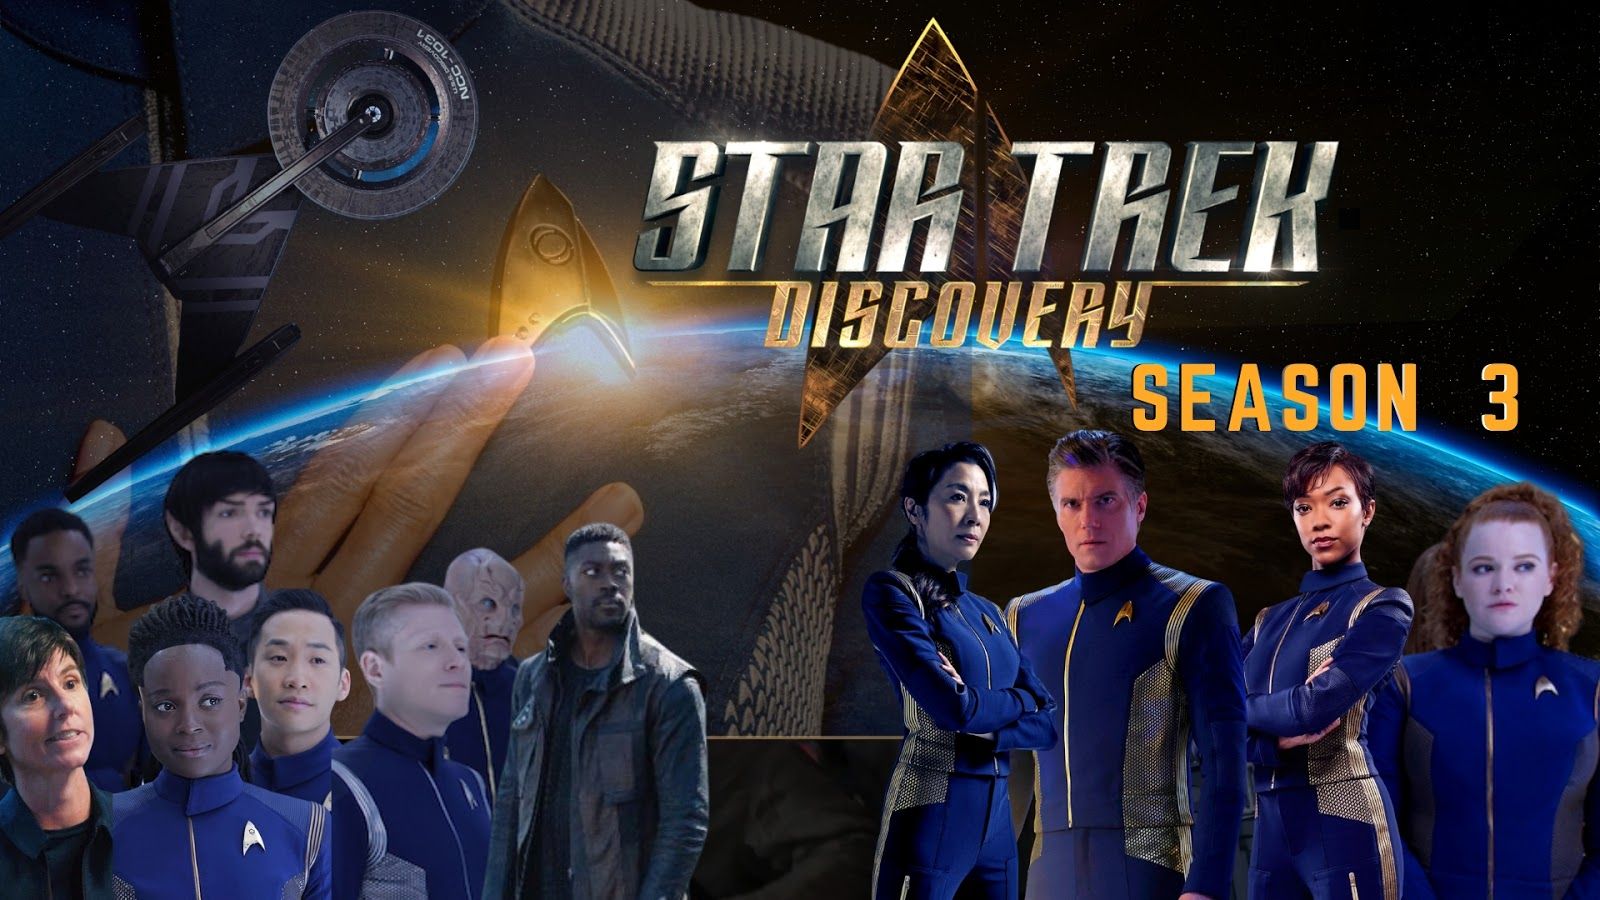 Star Trek: Discovery Season 3': Release Date, Cast (Anthony Rapp, Wilson Cruz, etc.) And What Is Going To Happen?